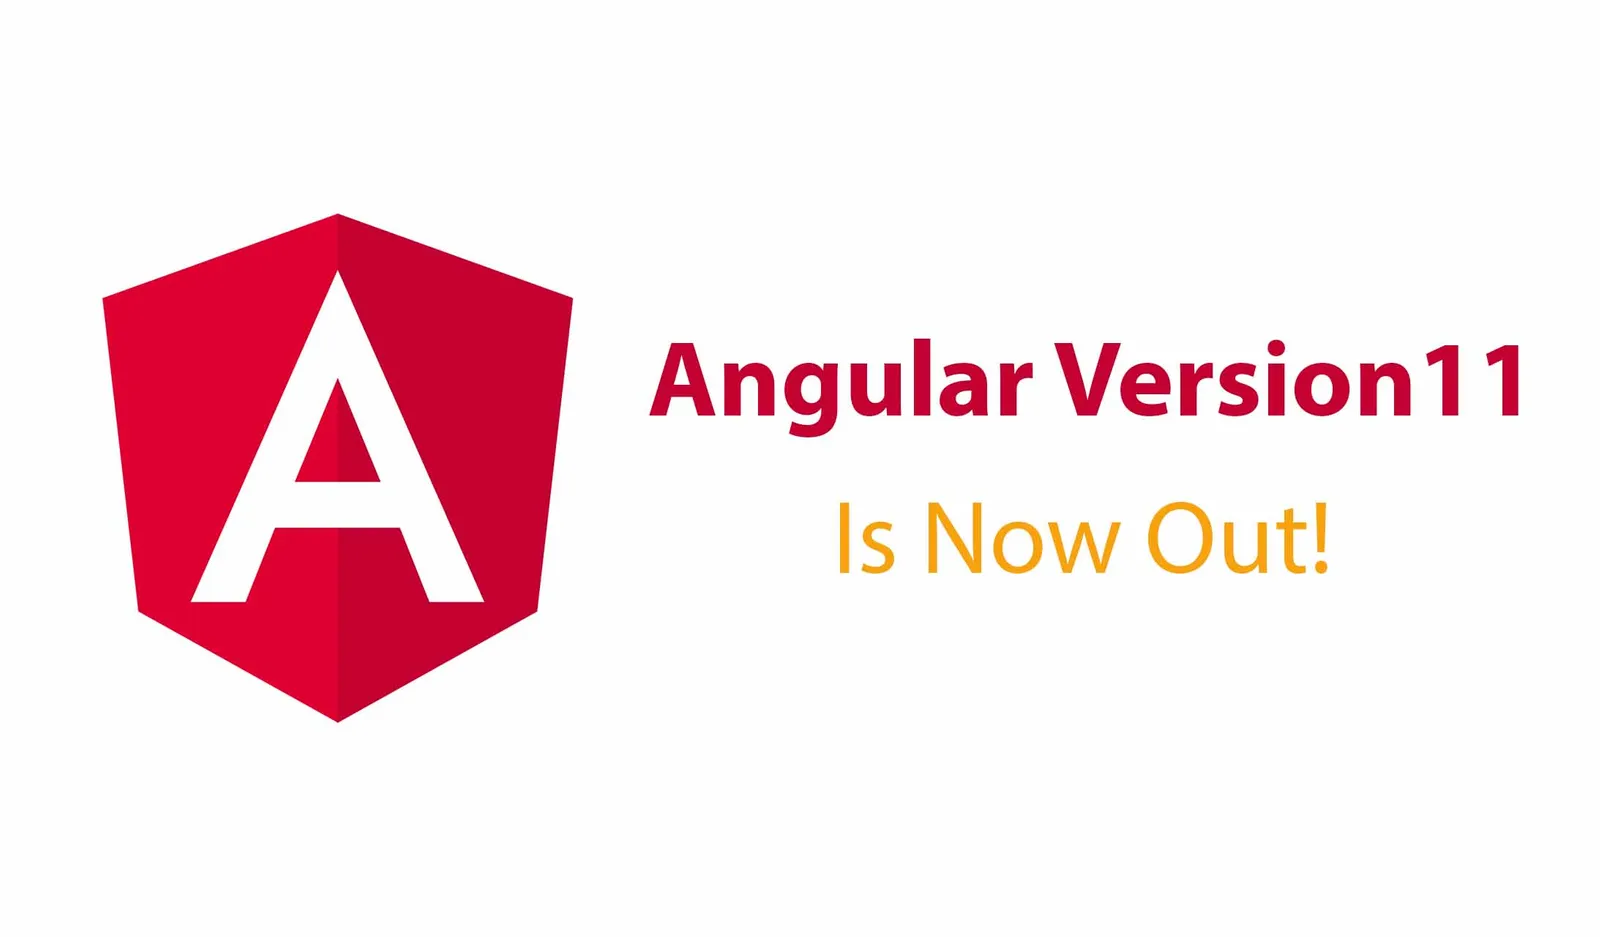 Angular Version 11 Is Out!